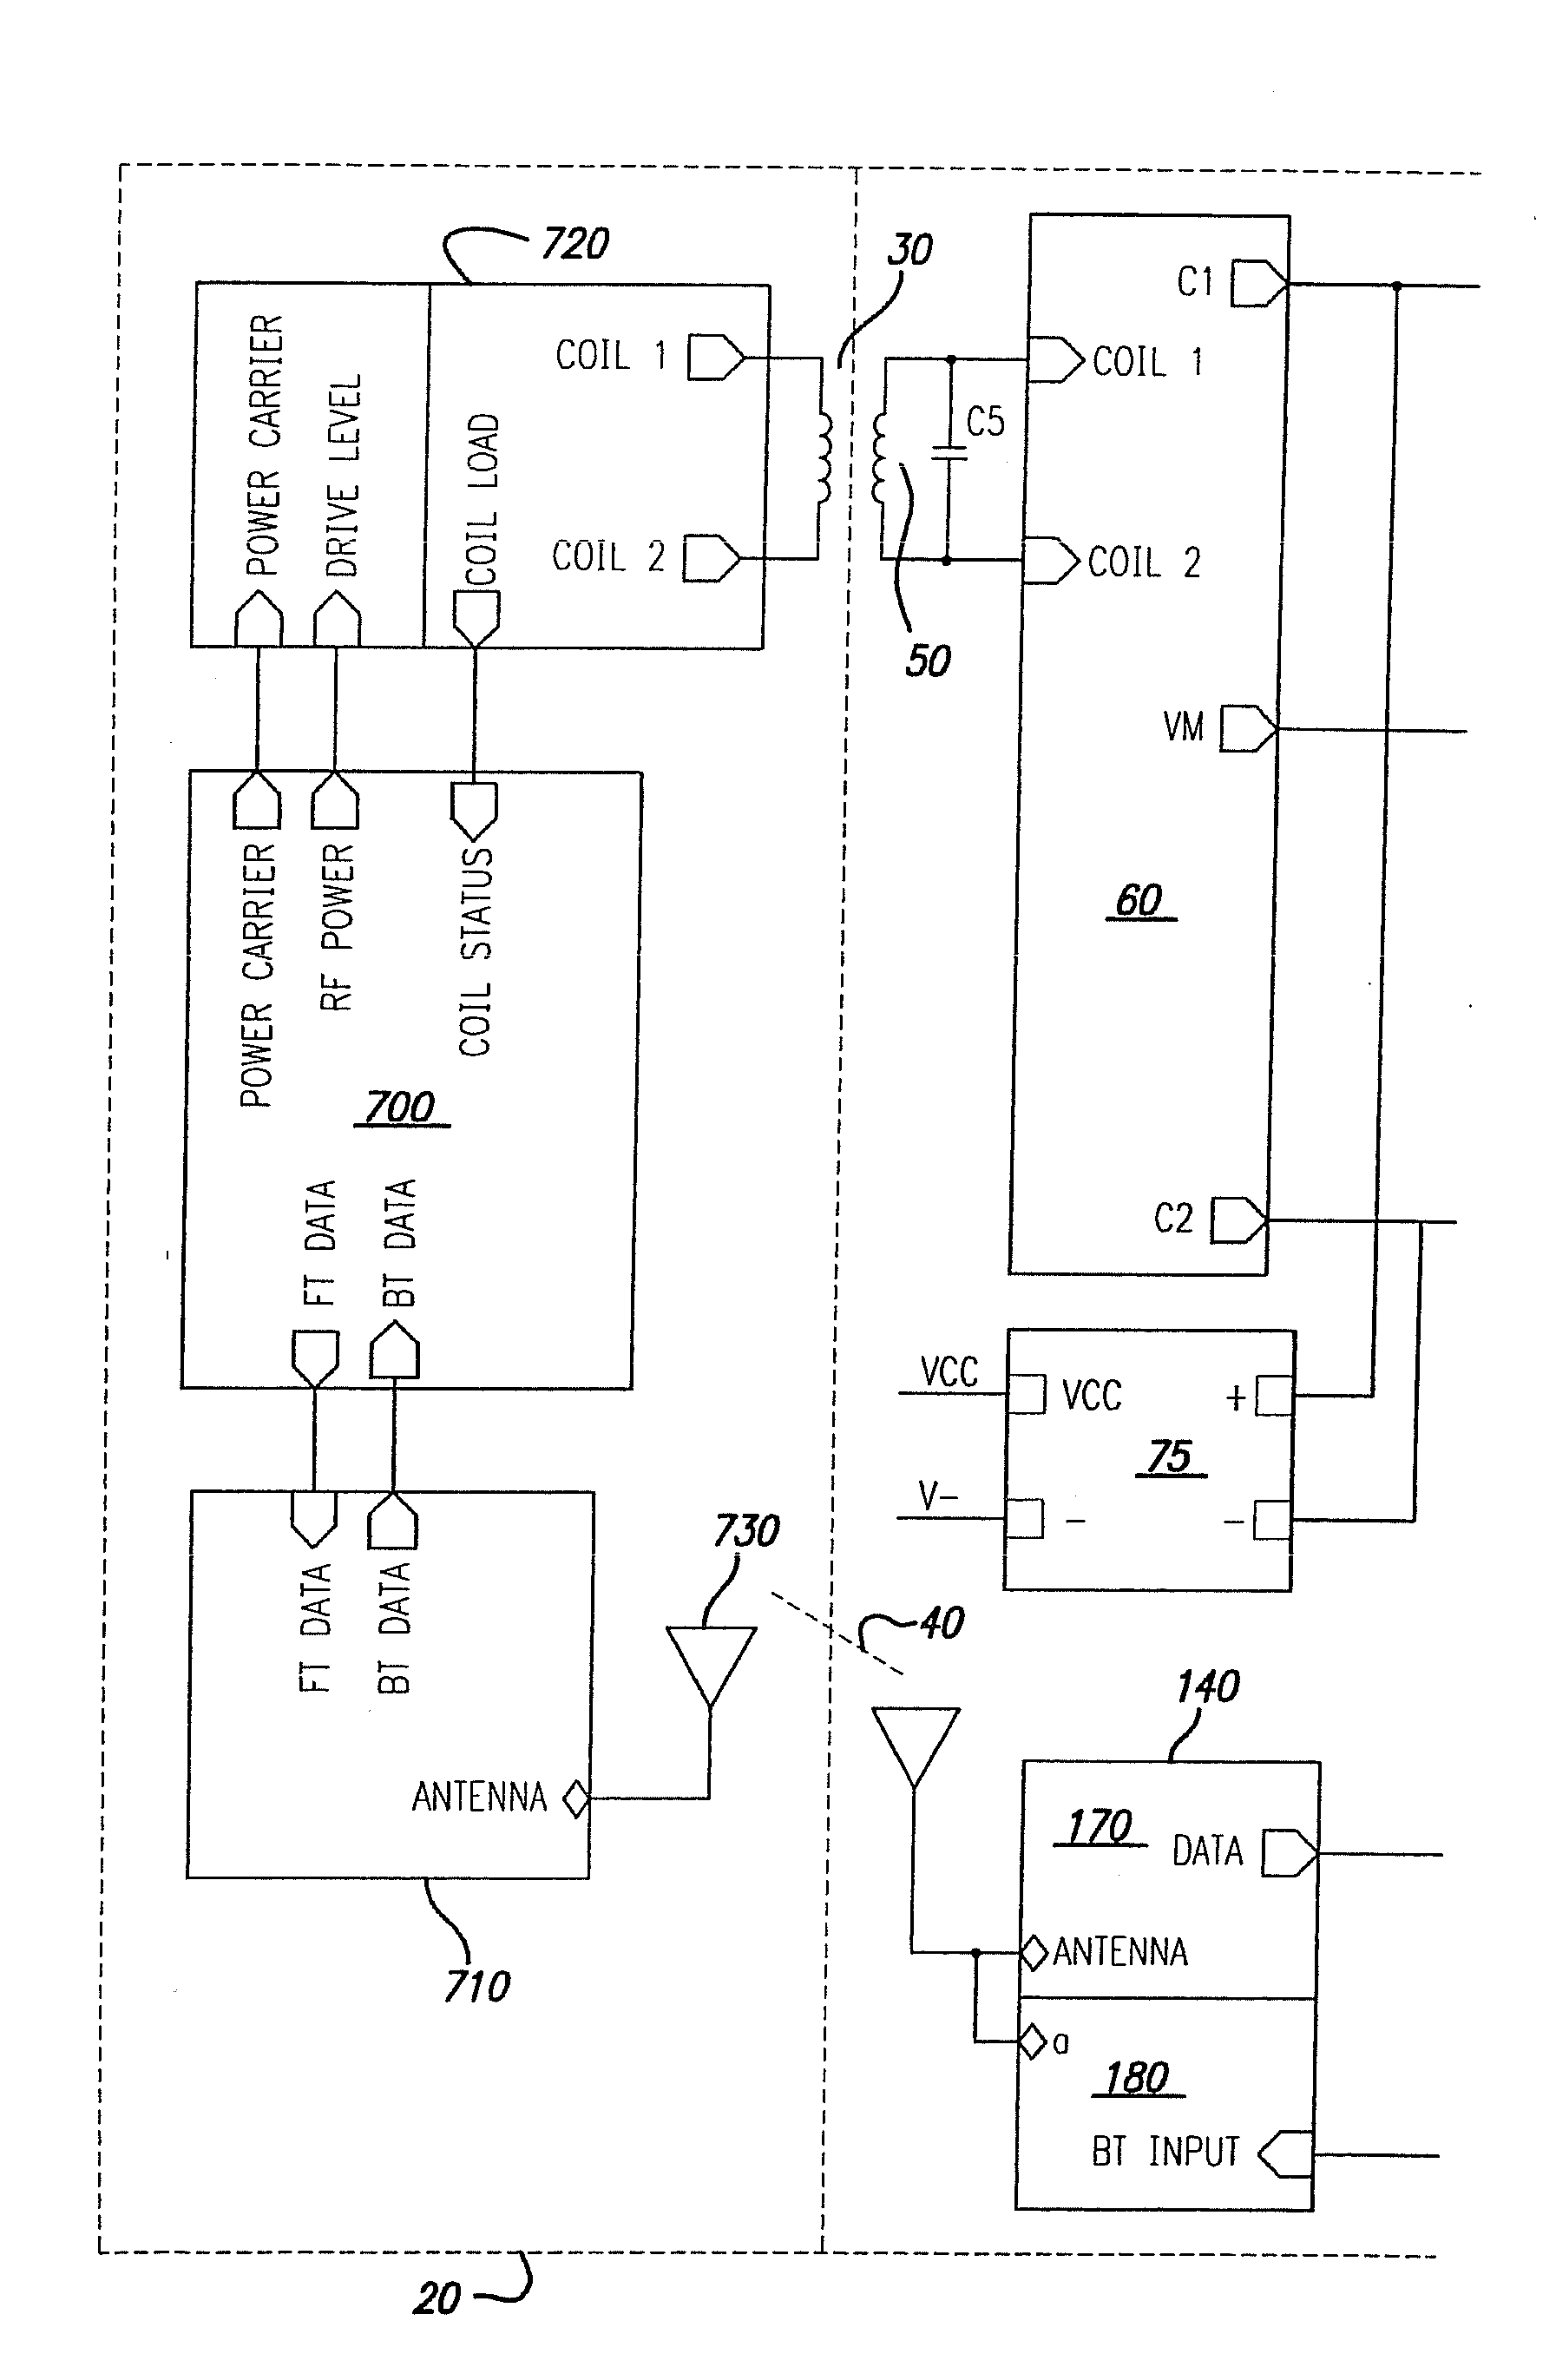 Power Scheme for Implant Stimulators on the Human or Animal Body